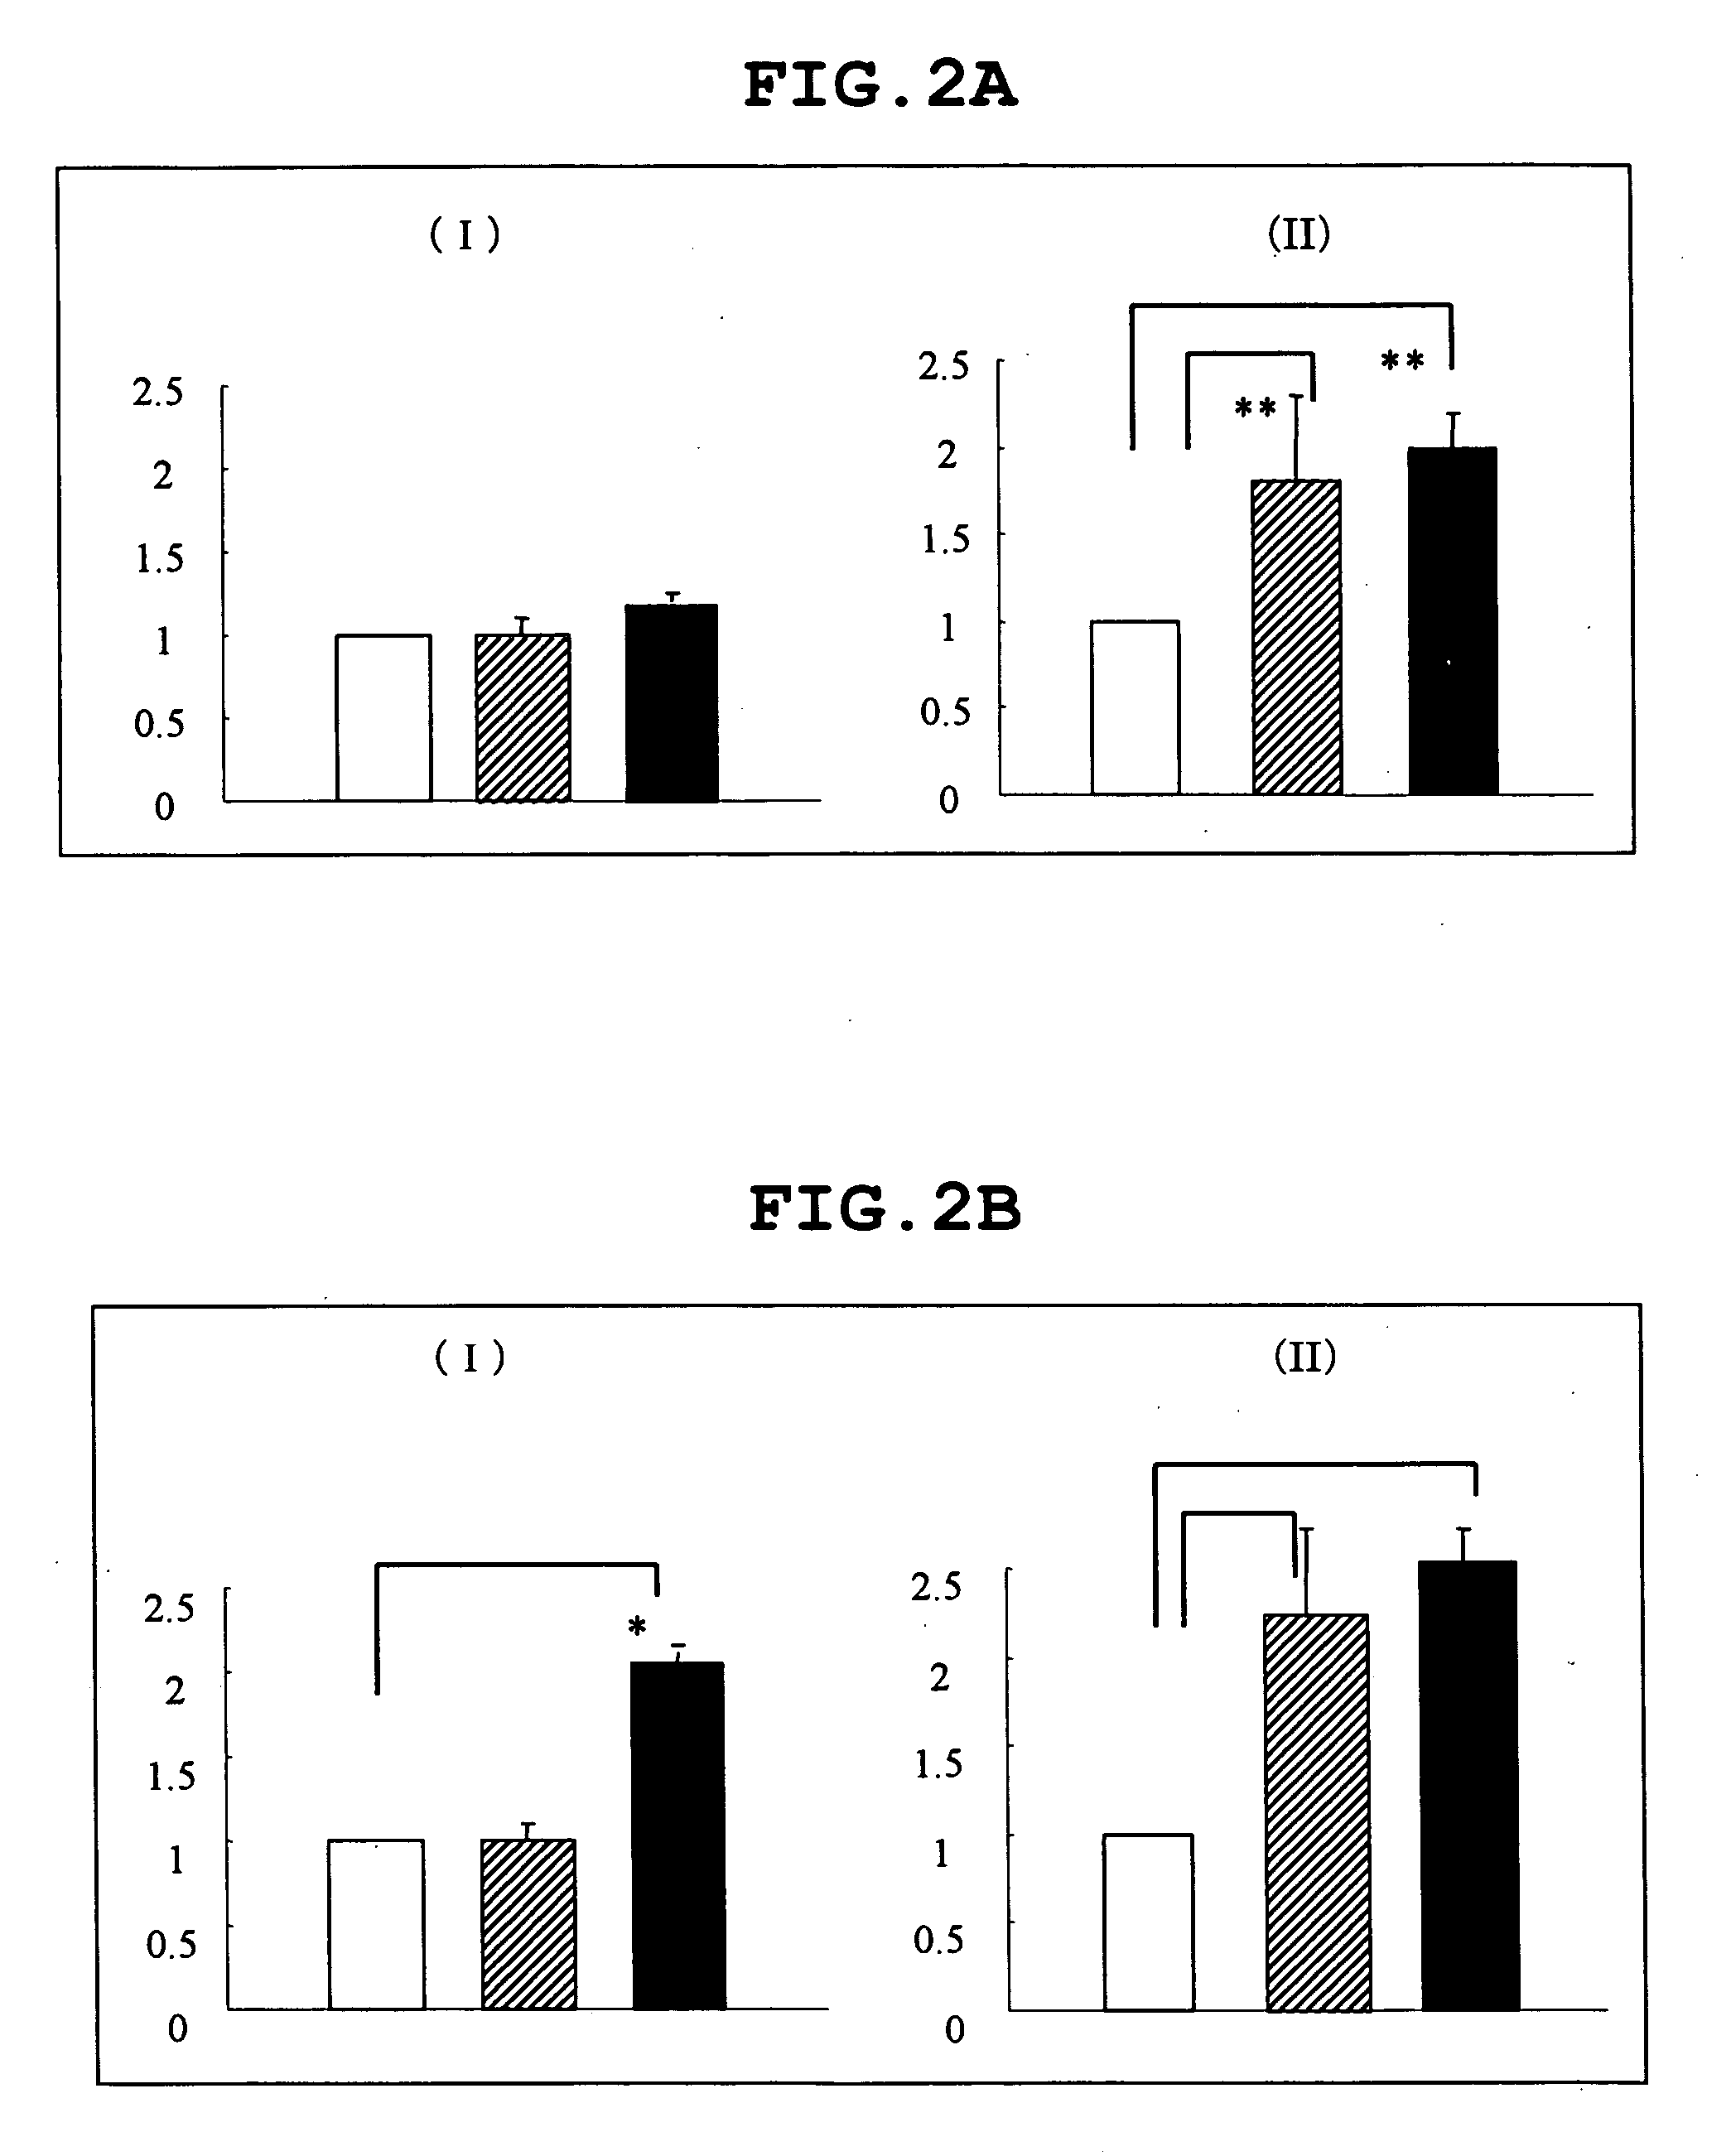 Cis-element regulating transcription, transcriptional regulatory factor binding specifically thereto and use of the same